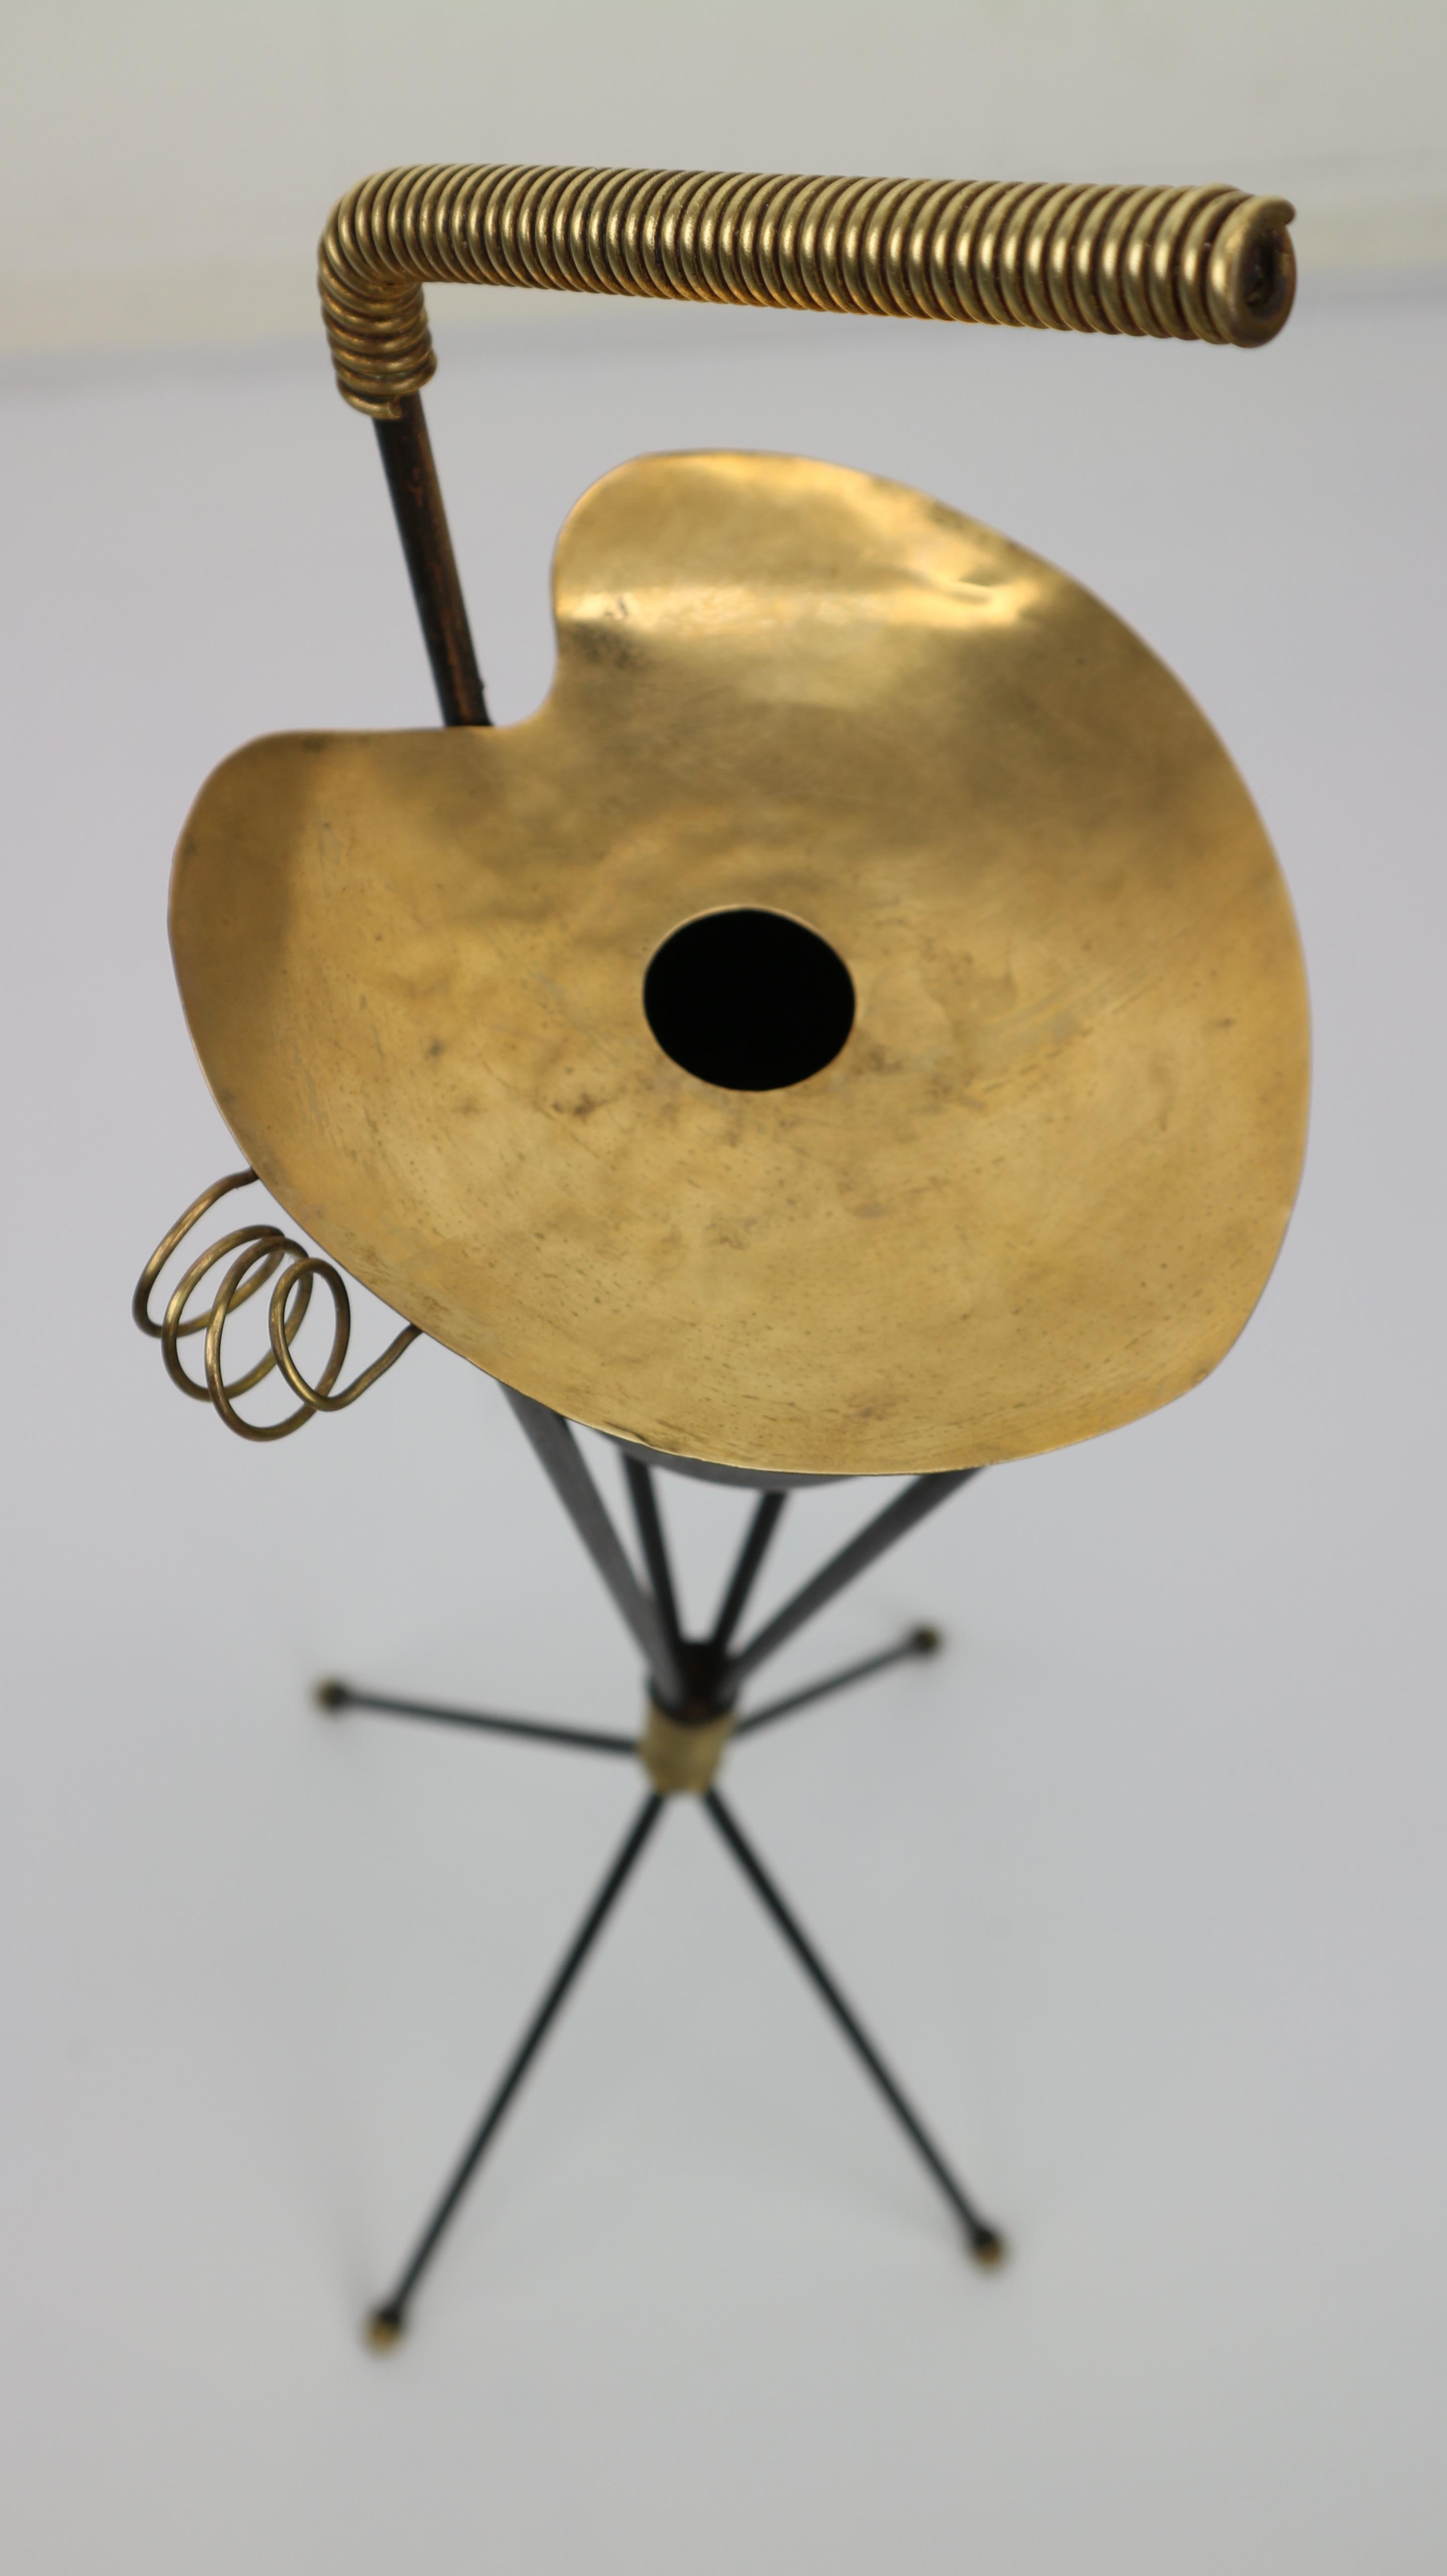 Elegant modernist lotus leaf brass ashtray on a blackened iron tripod stand with the subtile beautiful brass accents.
Very good original condition with a nice patina to the lacquered metal.